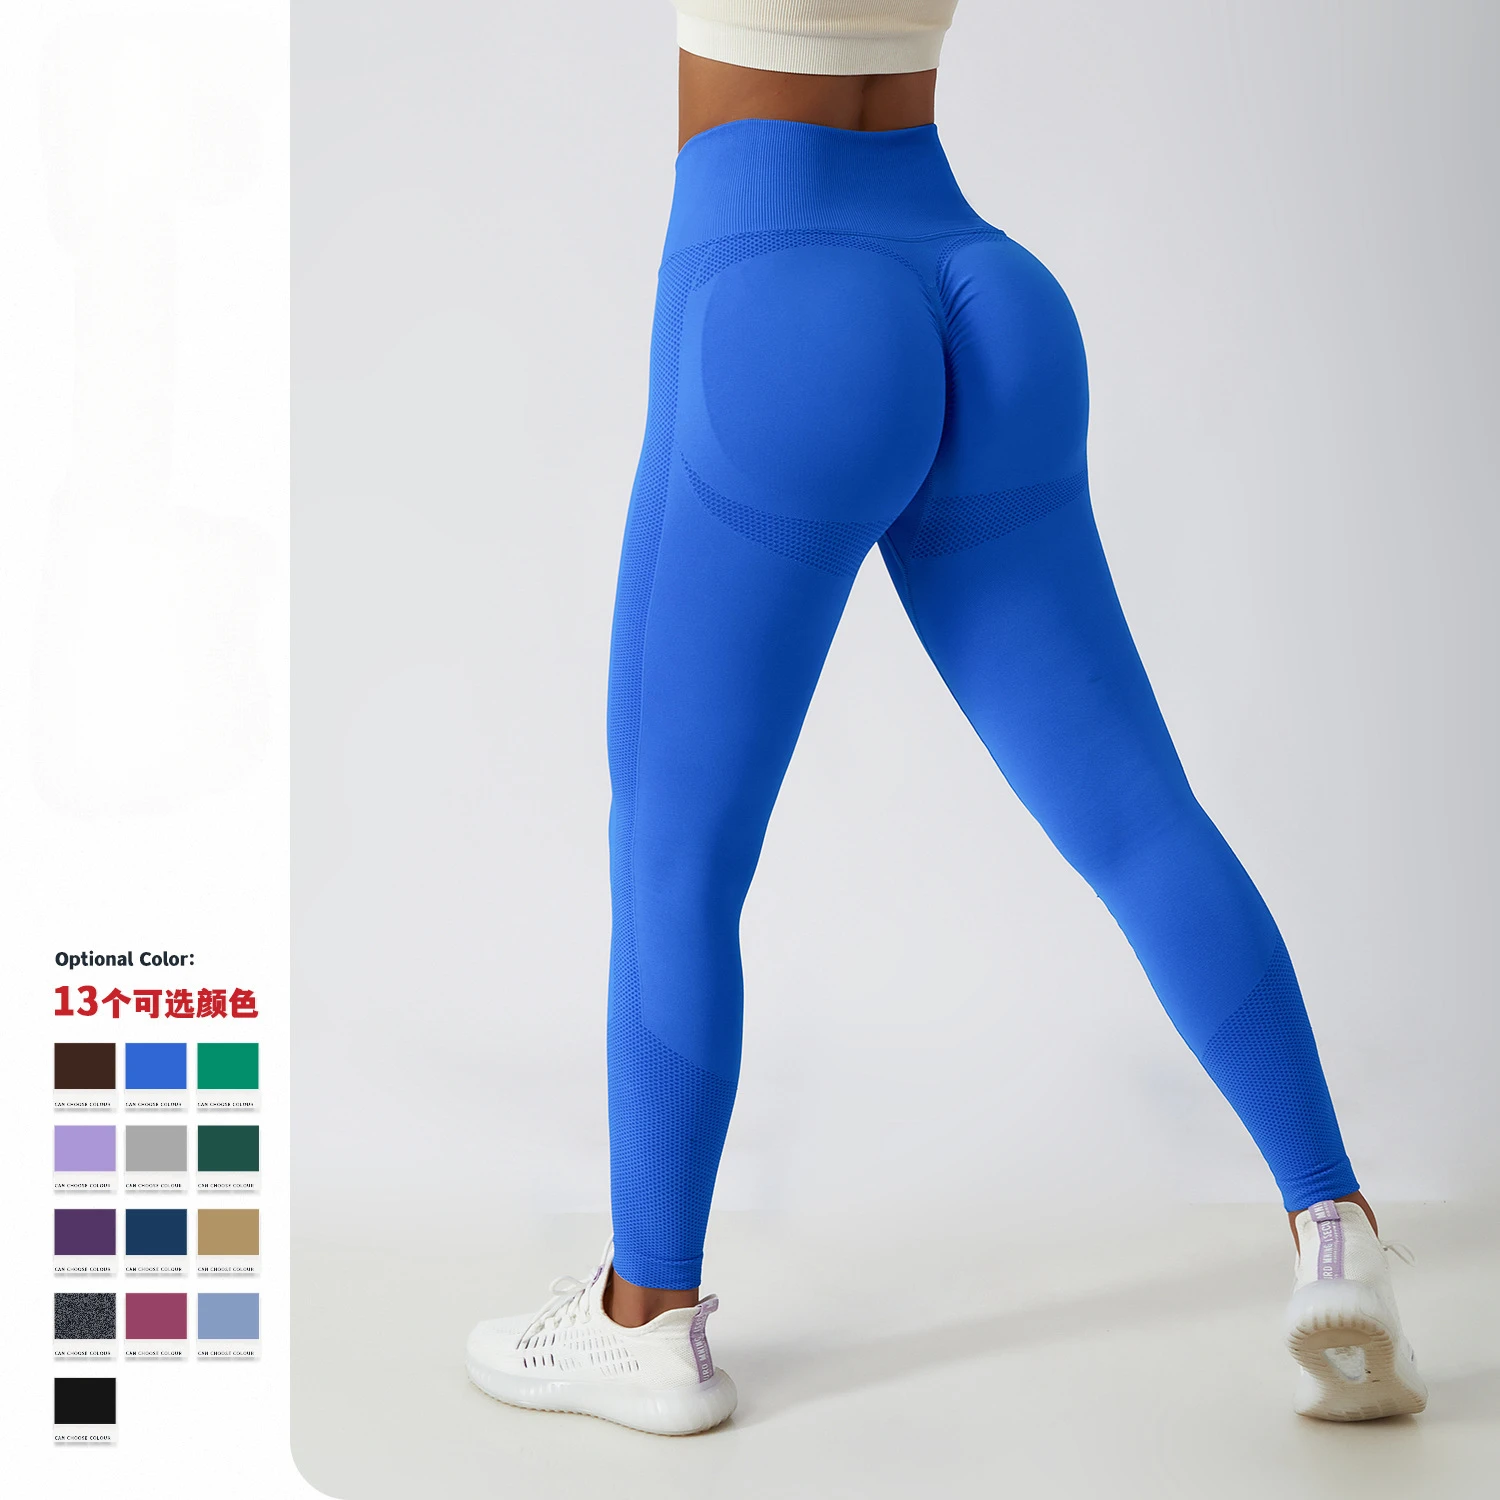 outdoor invisible open crotch jeans women s blue large opening urine sex convenient pants tight pant slimming casual pants women Outdoor running fitness pants, hip lifting yoga pants, seamless tight fitting, high waisted, breathable sports for women